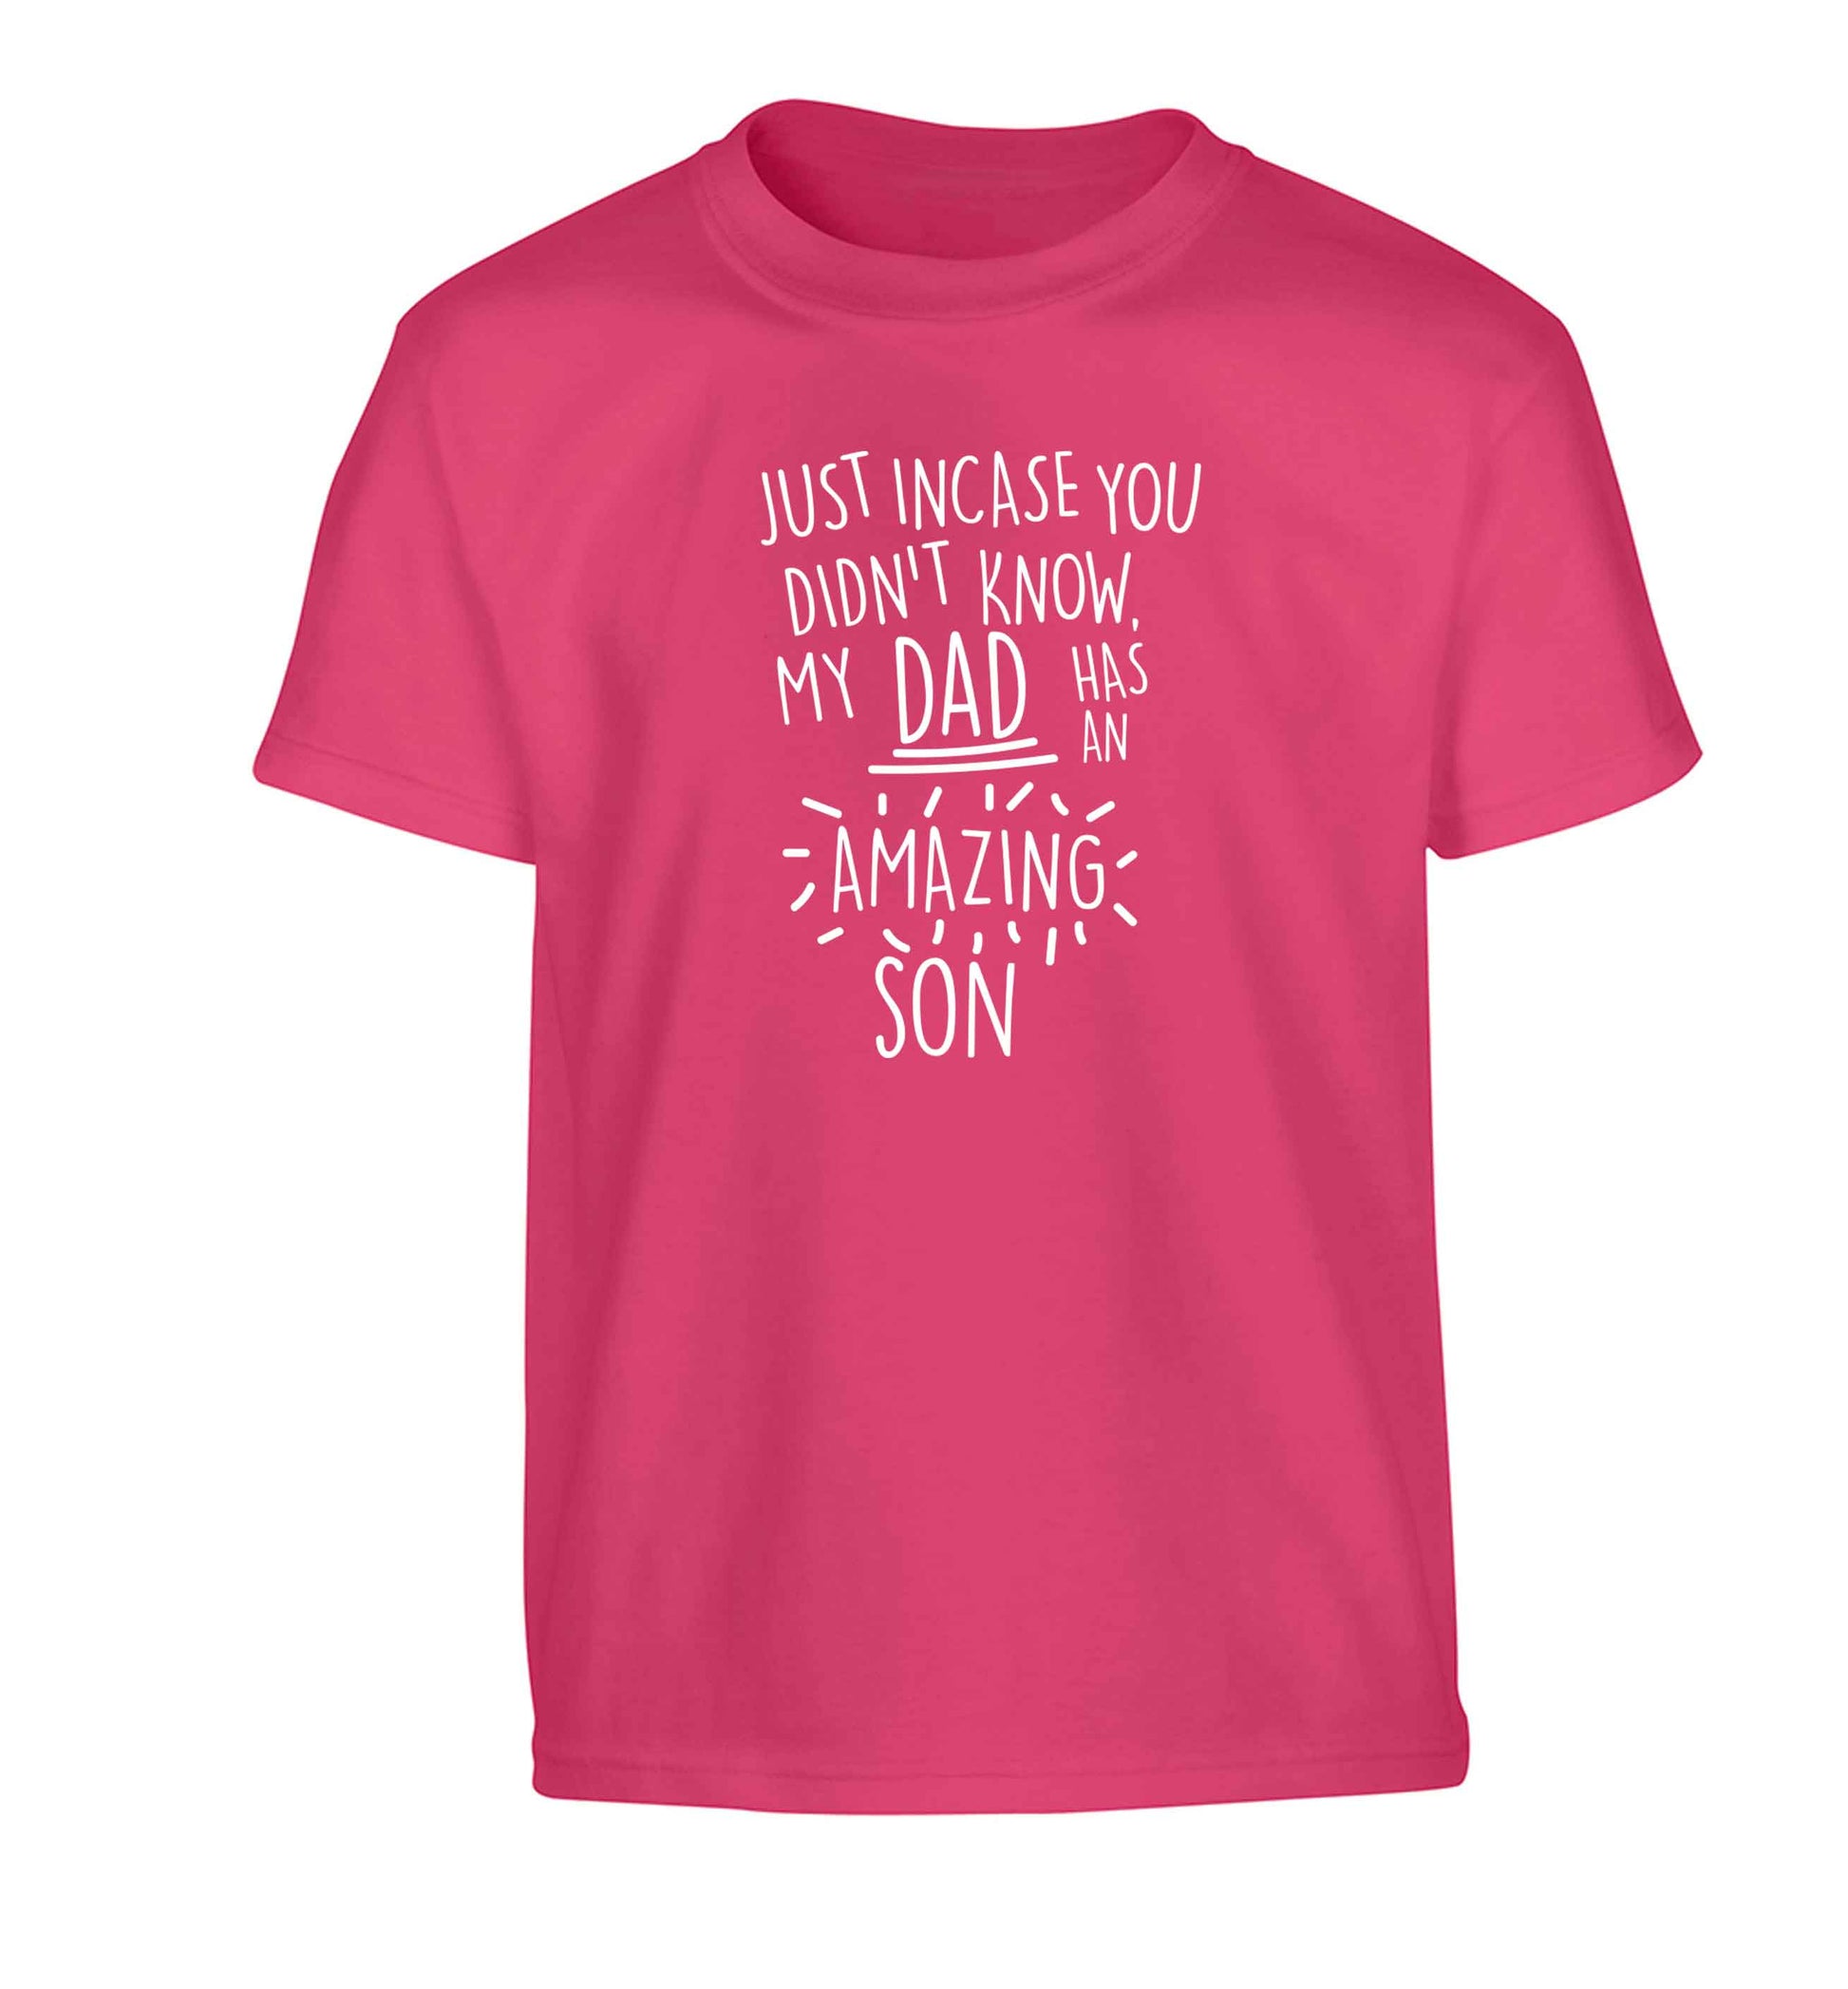 Just incase you didn't know my dad has an amazing son Children's pink Tshirt 12-13 Years